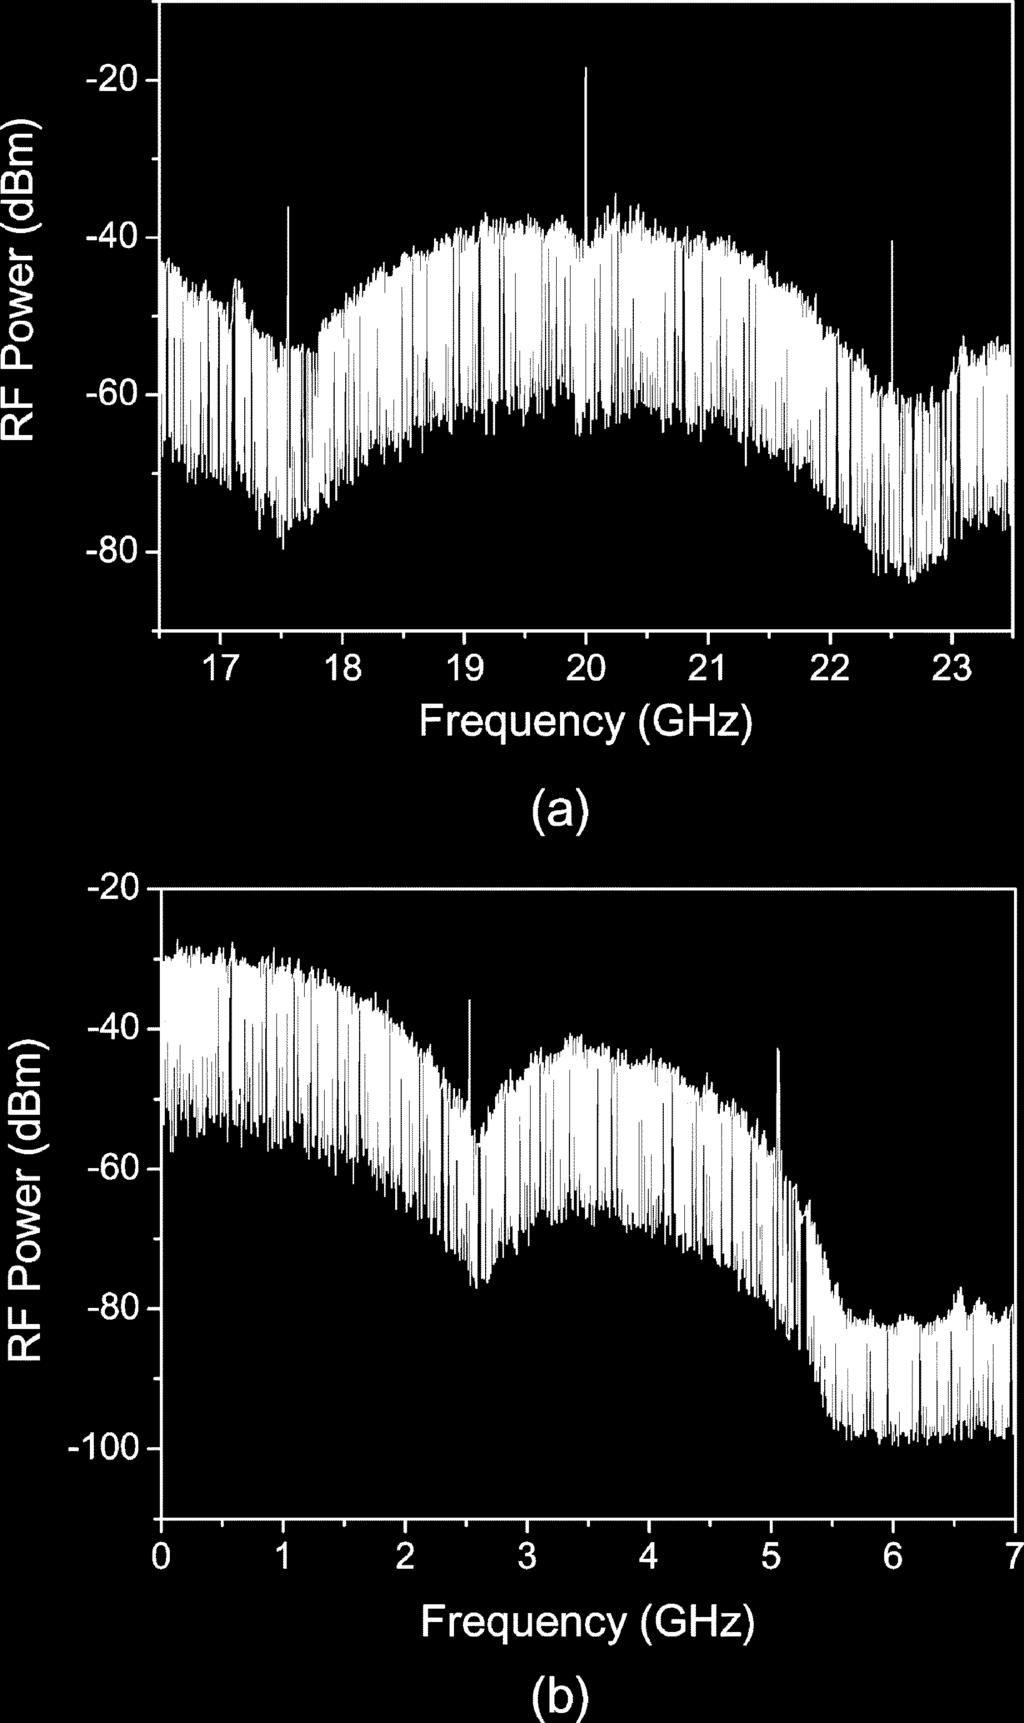 2354 IEEE TRANSACTIONS ON MICROWAVE THEORY AND TECHNIQUES, VOL. 59, NO. 9, SEPTEMBER 2011 Fig. 7. Measured BER of the RoF downlink system.